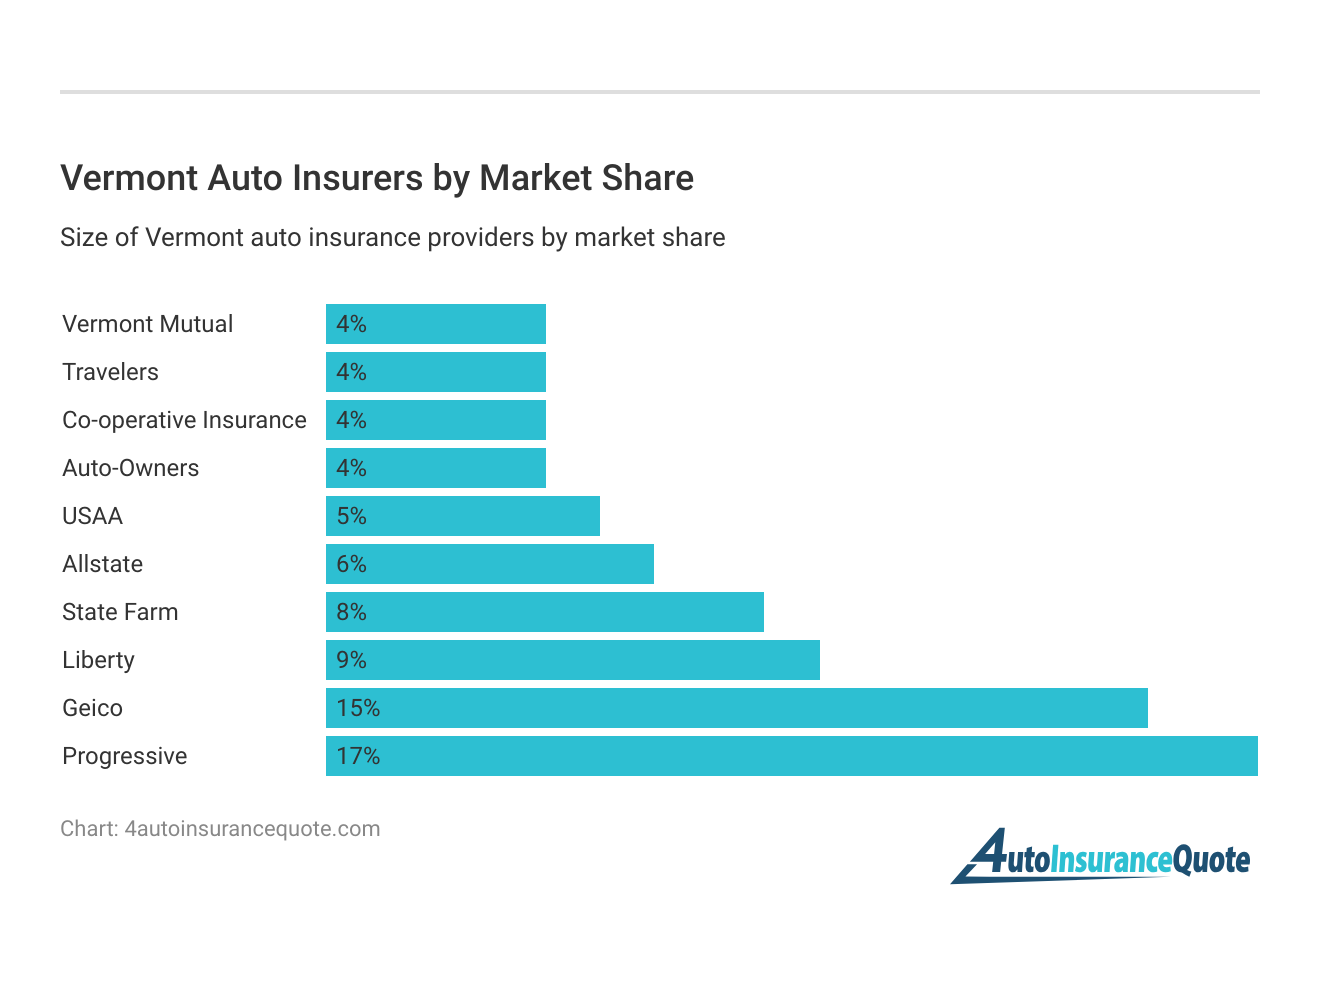 <h3>Vermont Auto Insurers by Market Share</h3>